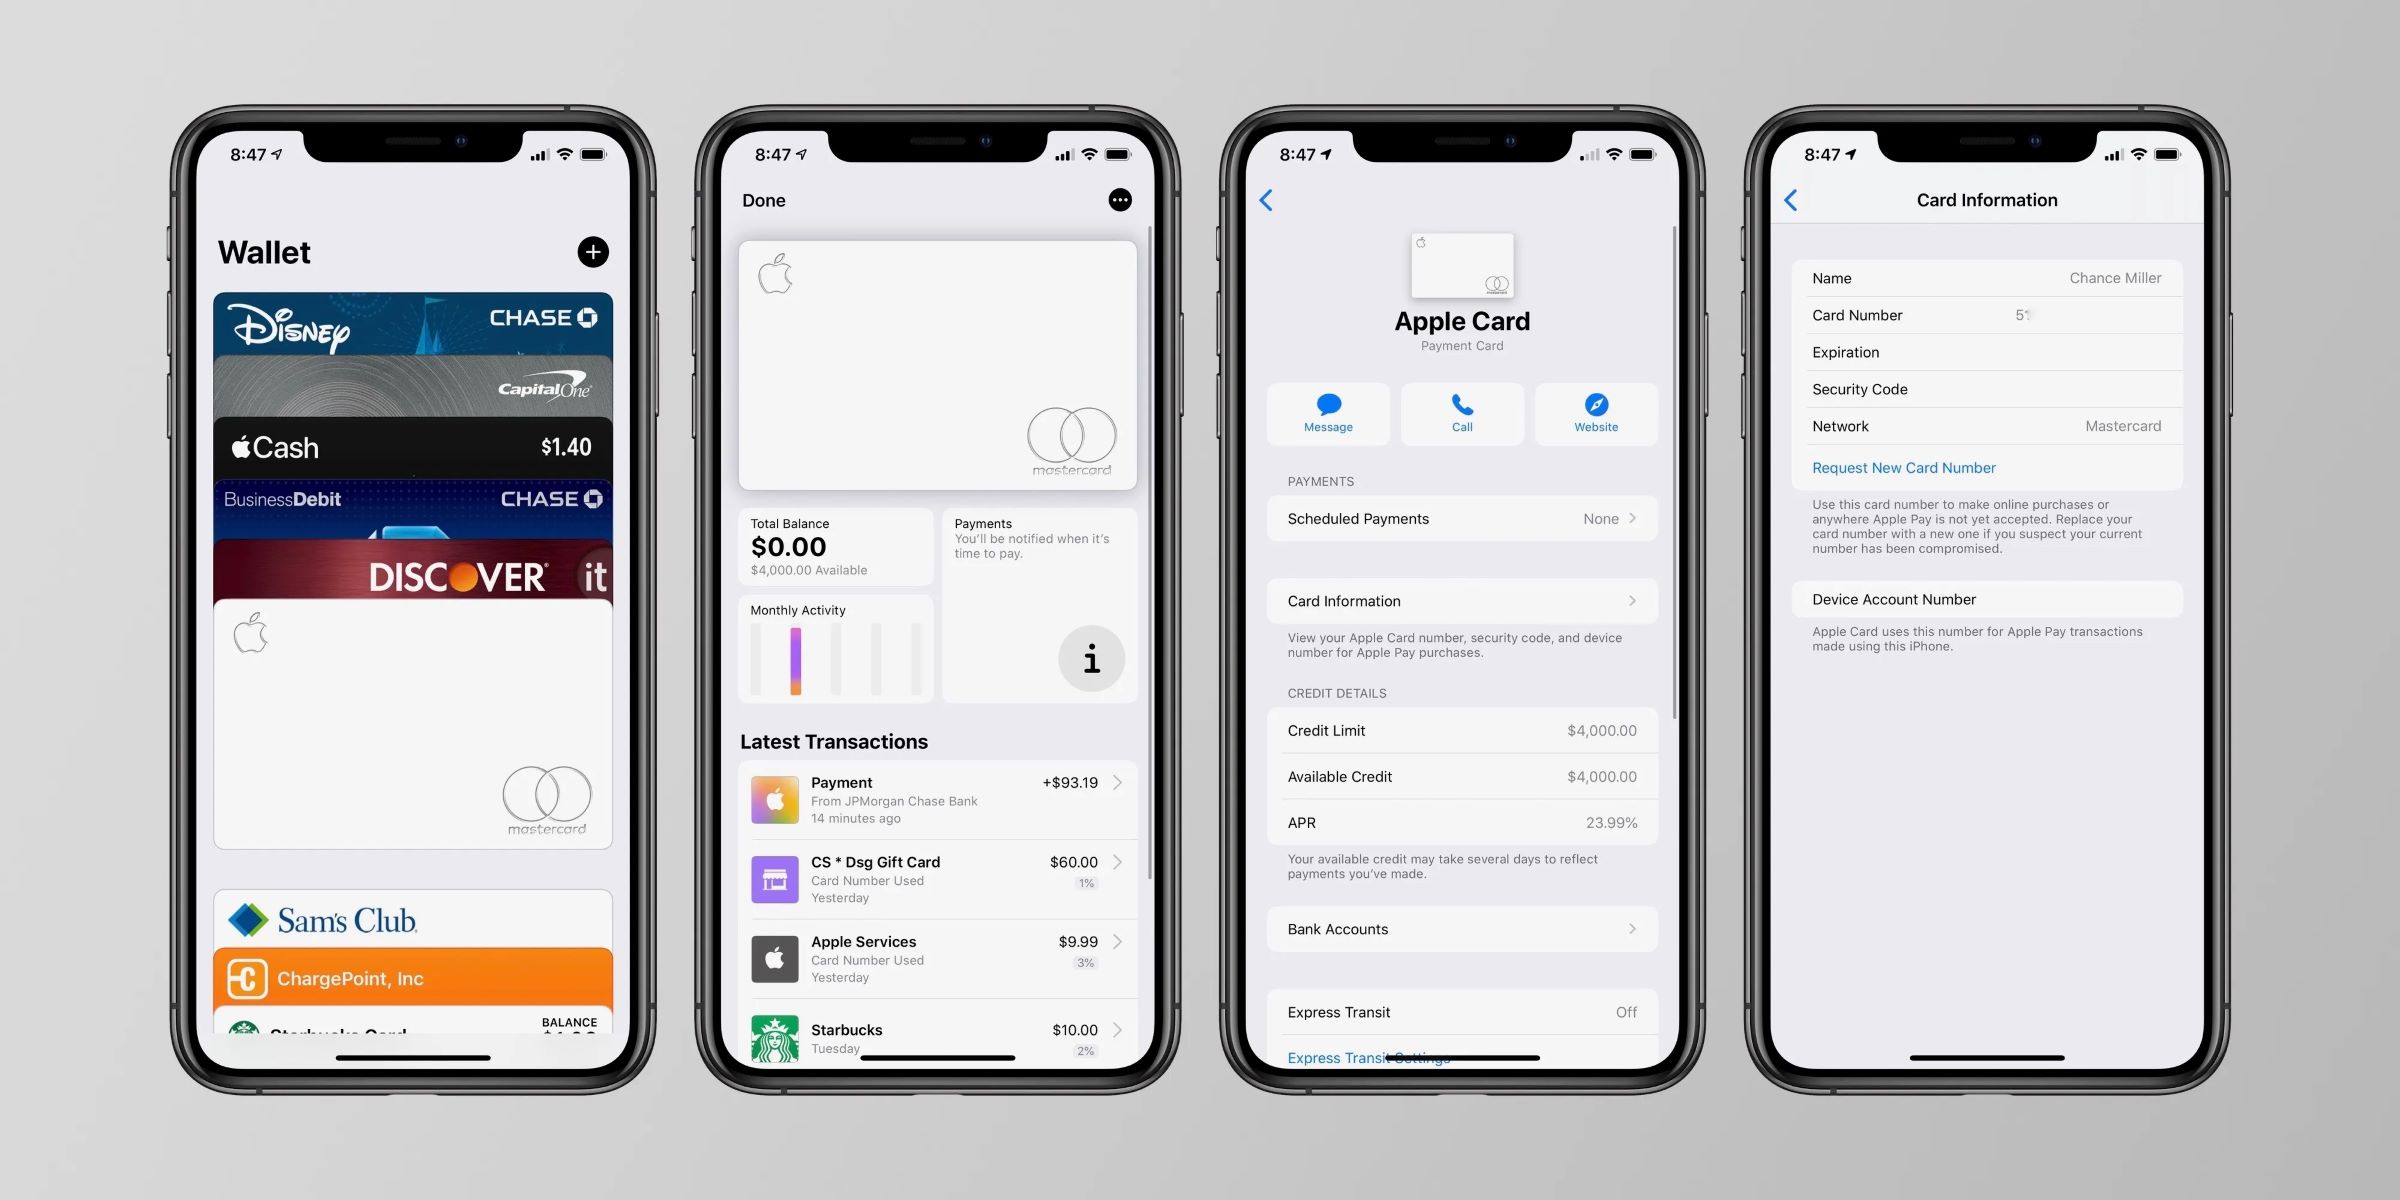 How To Find Credit Card Info On IPhone